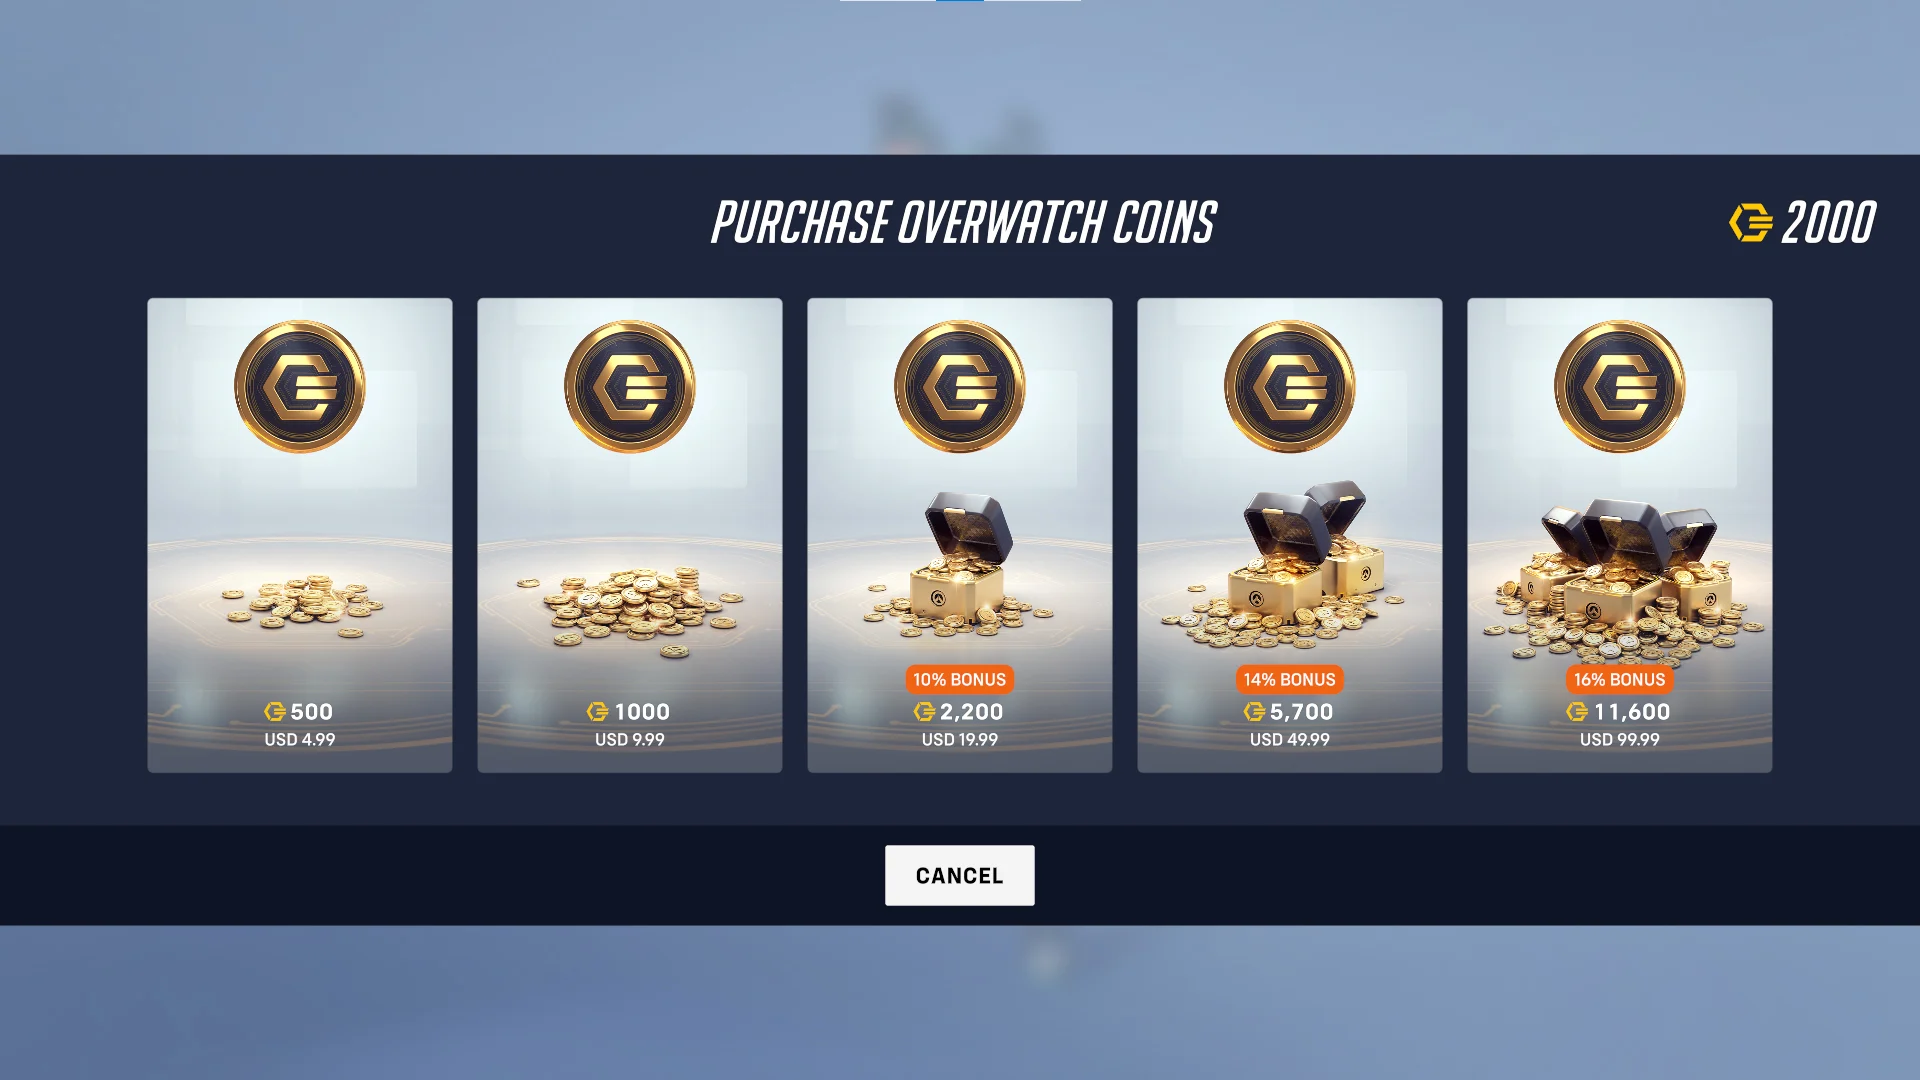 Old Overwatch Skins Cost $12,000 in Overwatch 2